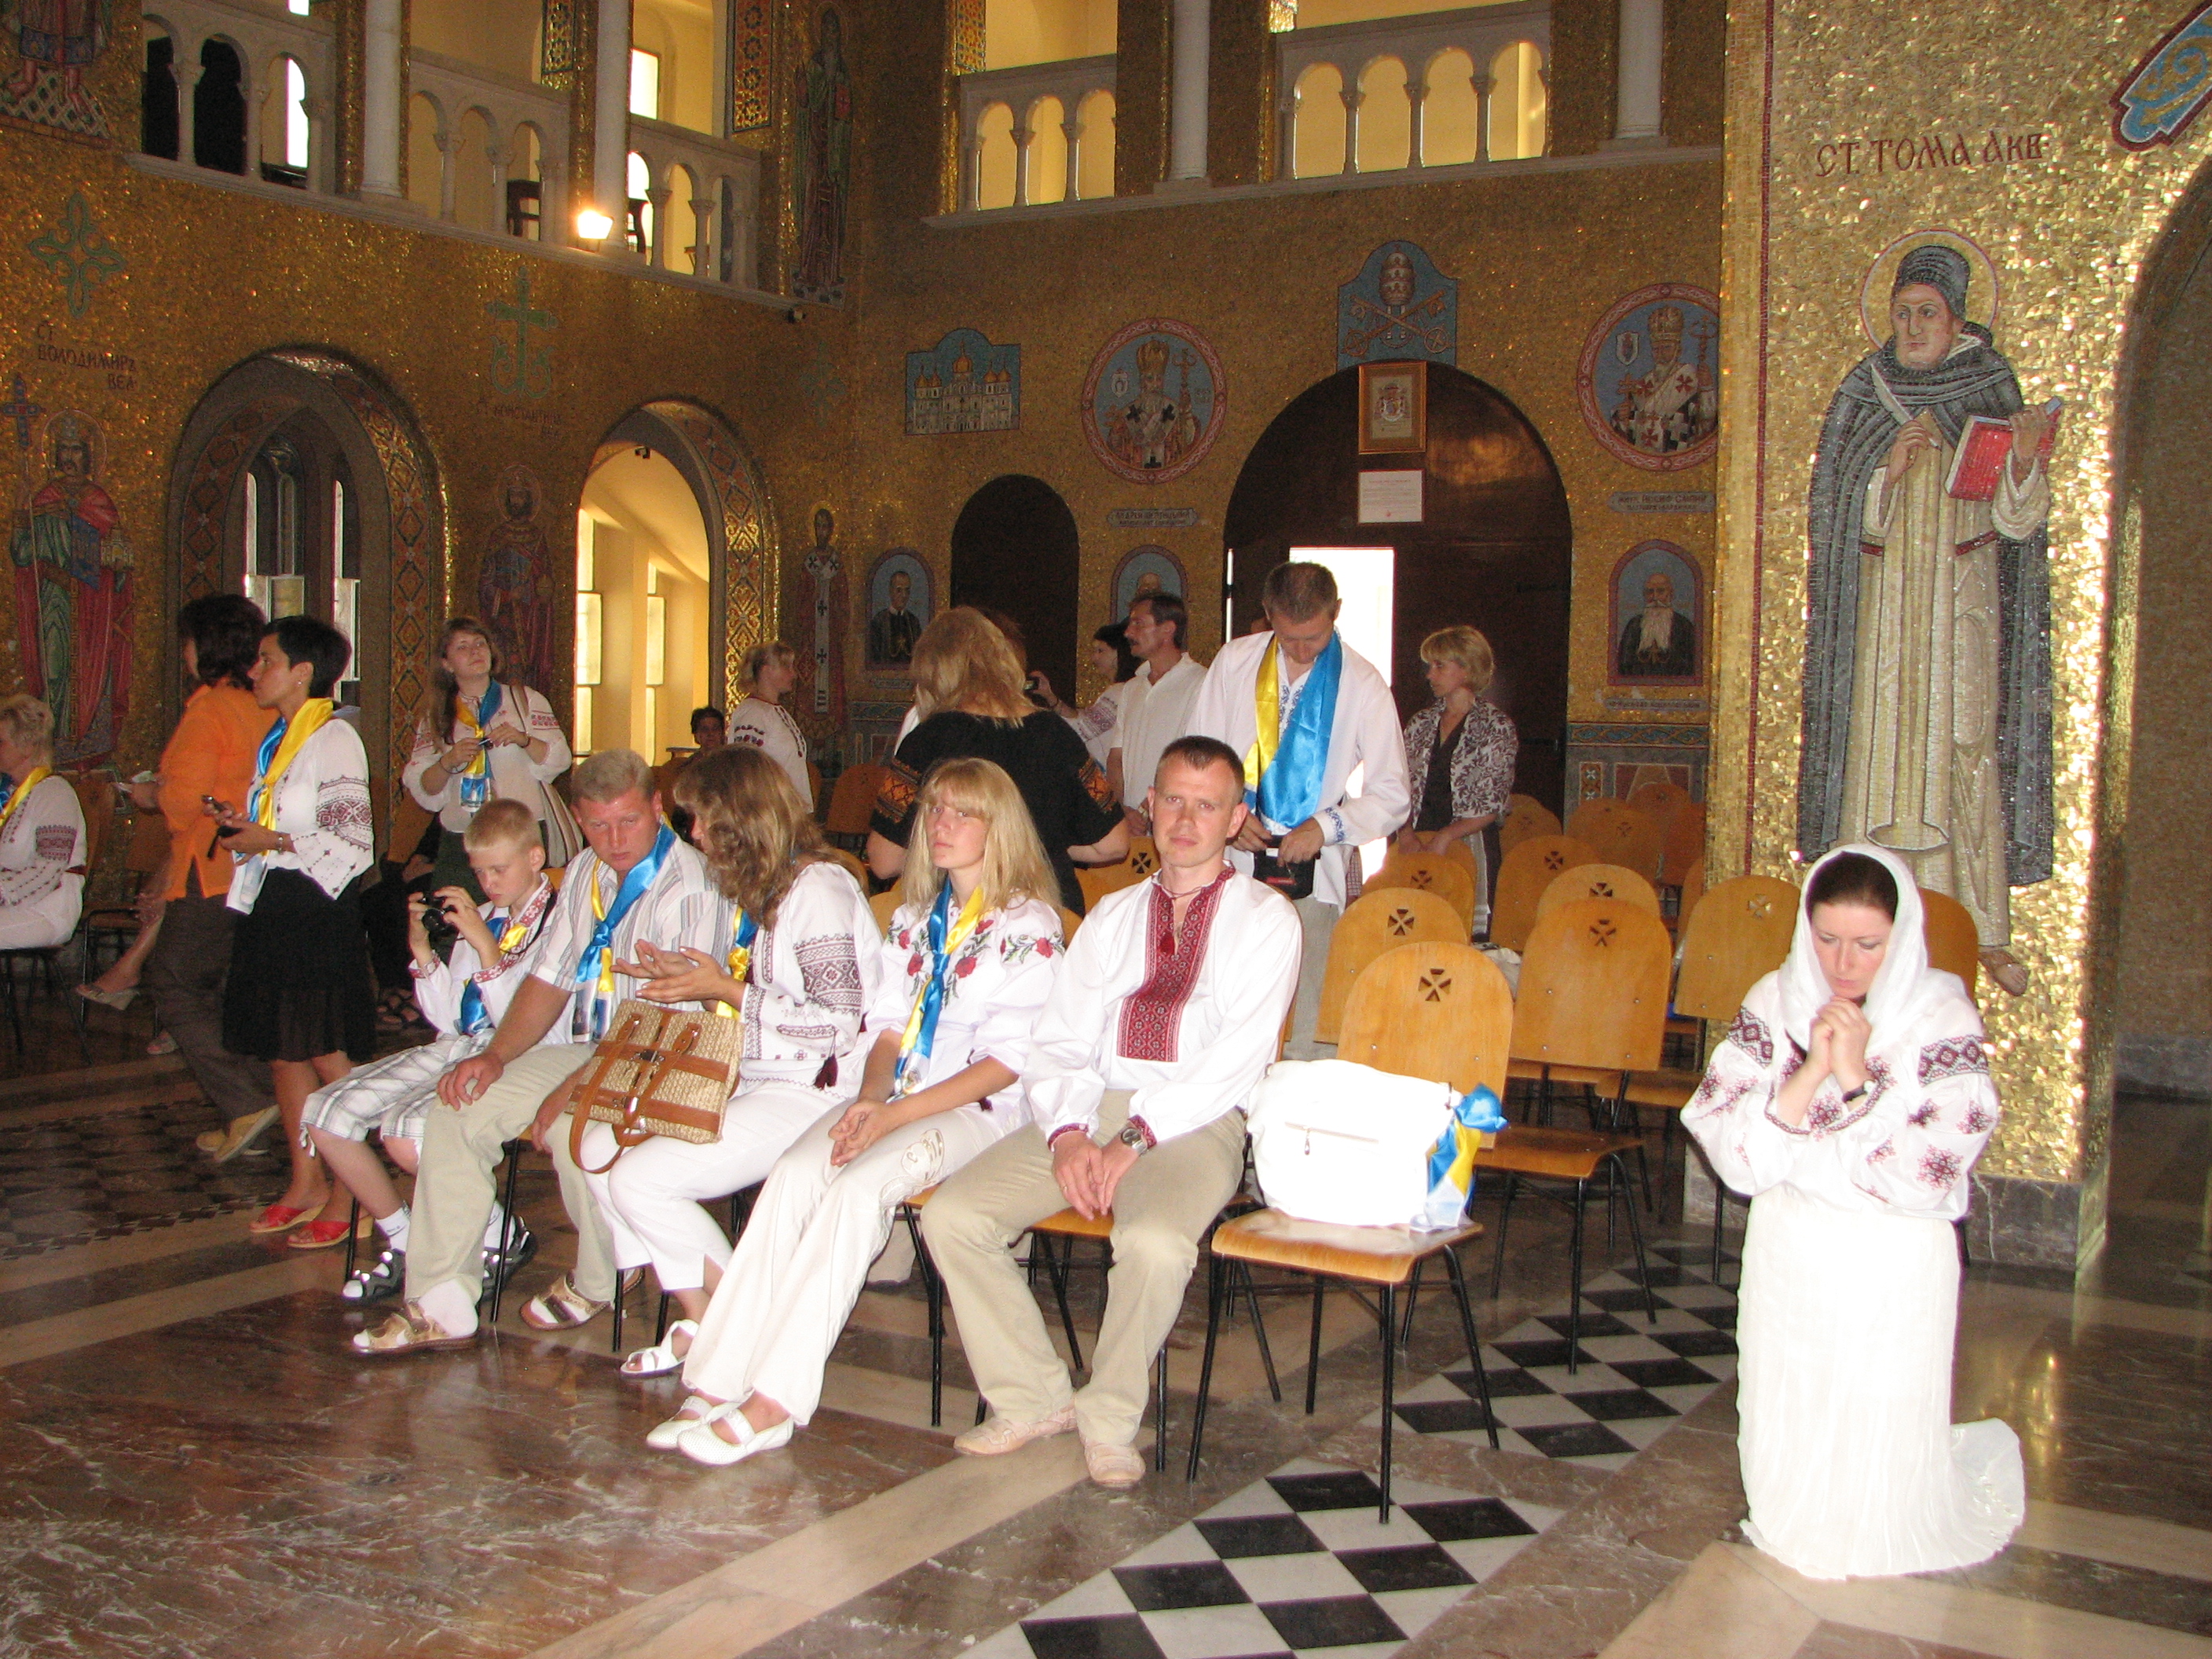 People in a Catholic Church in Rome, Italy, European Union, August 2011, picture 13.